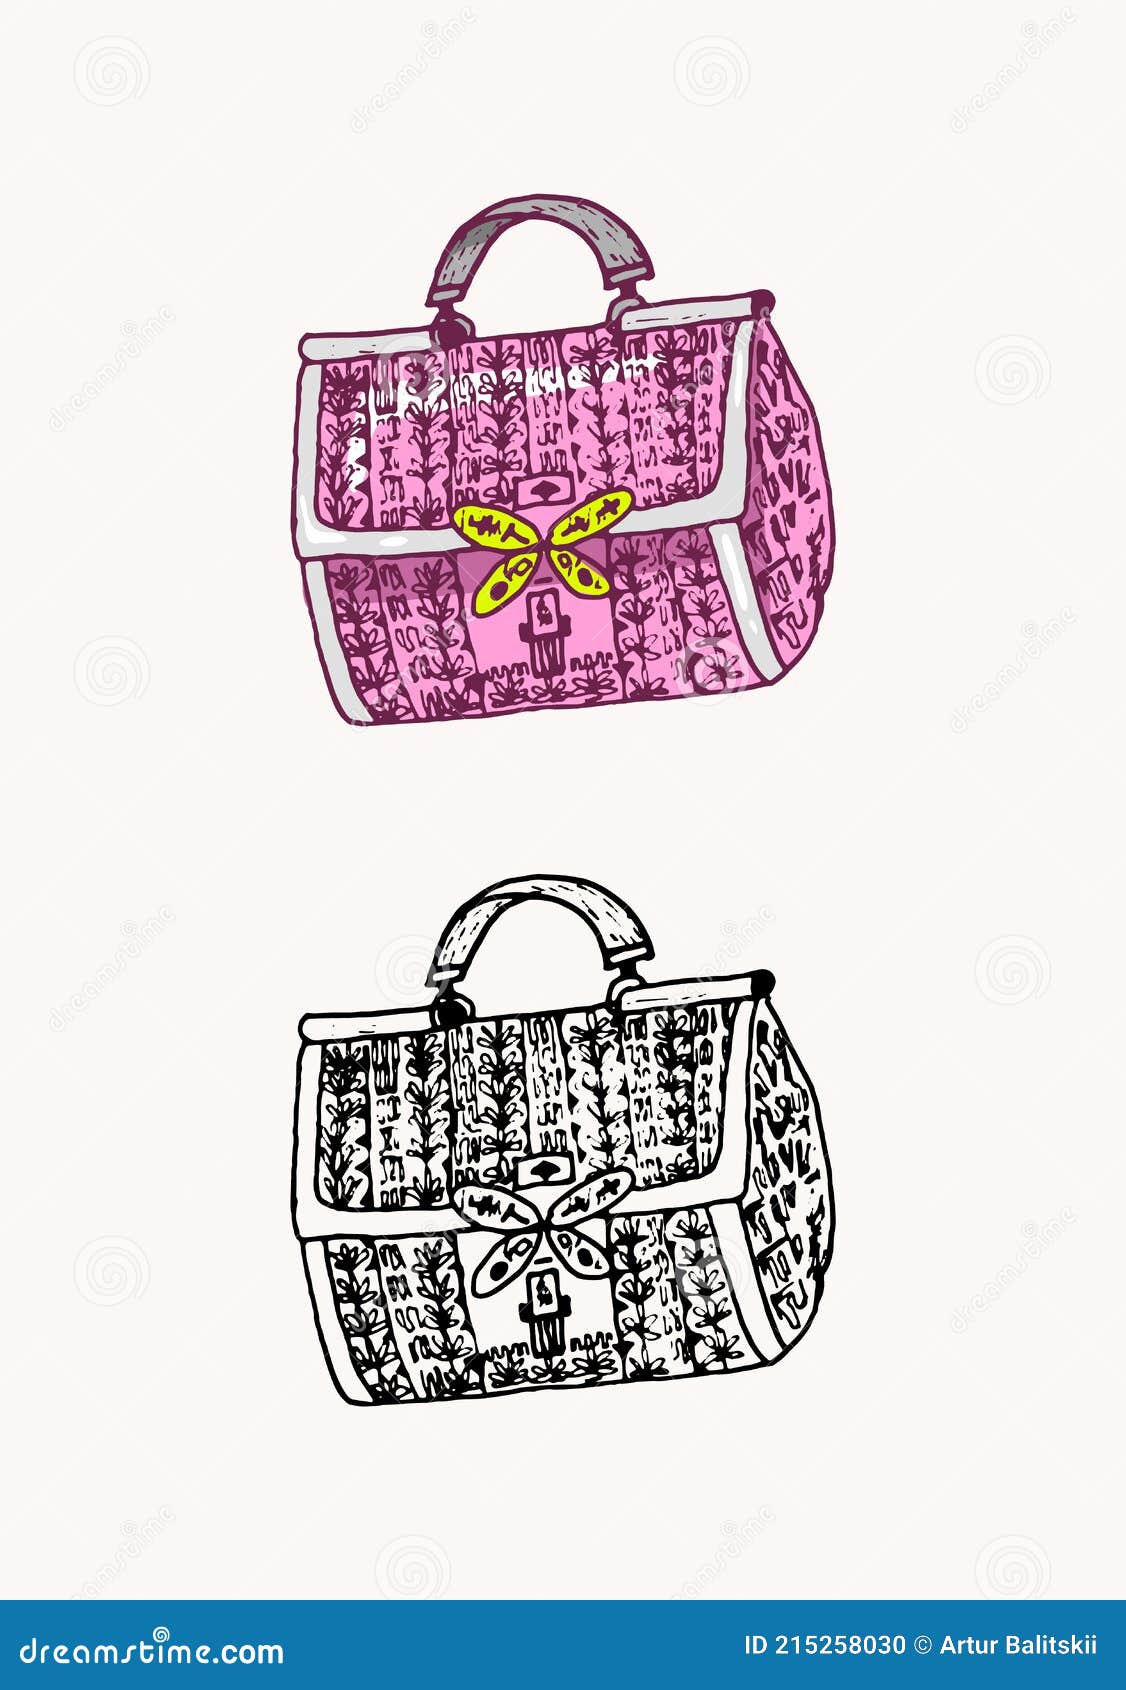 https://thumbs.dreamstime.com/z/women-s-bag-vintage-style-hand-drawn-doodle-fashion-accessories-vector-illustration-sticker-diary-bags-set-patch-215258030.jpg